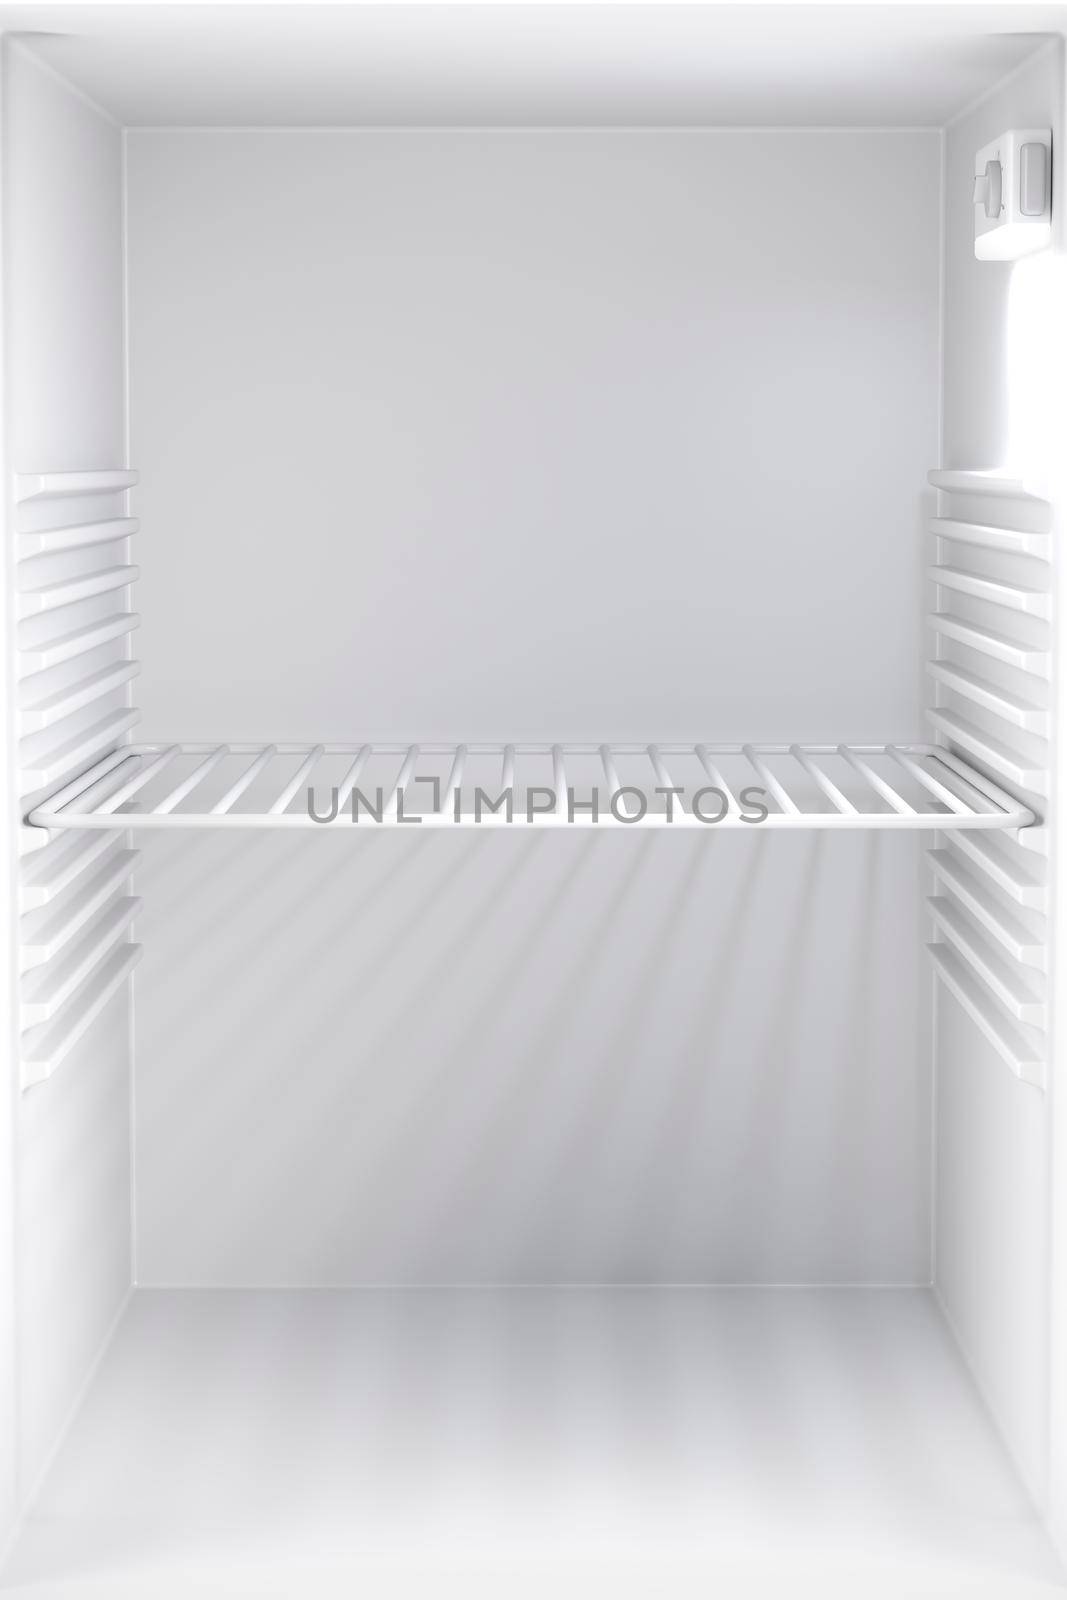 Inside view of an empty small refrigerator, front view